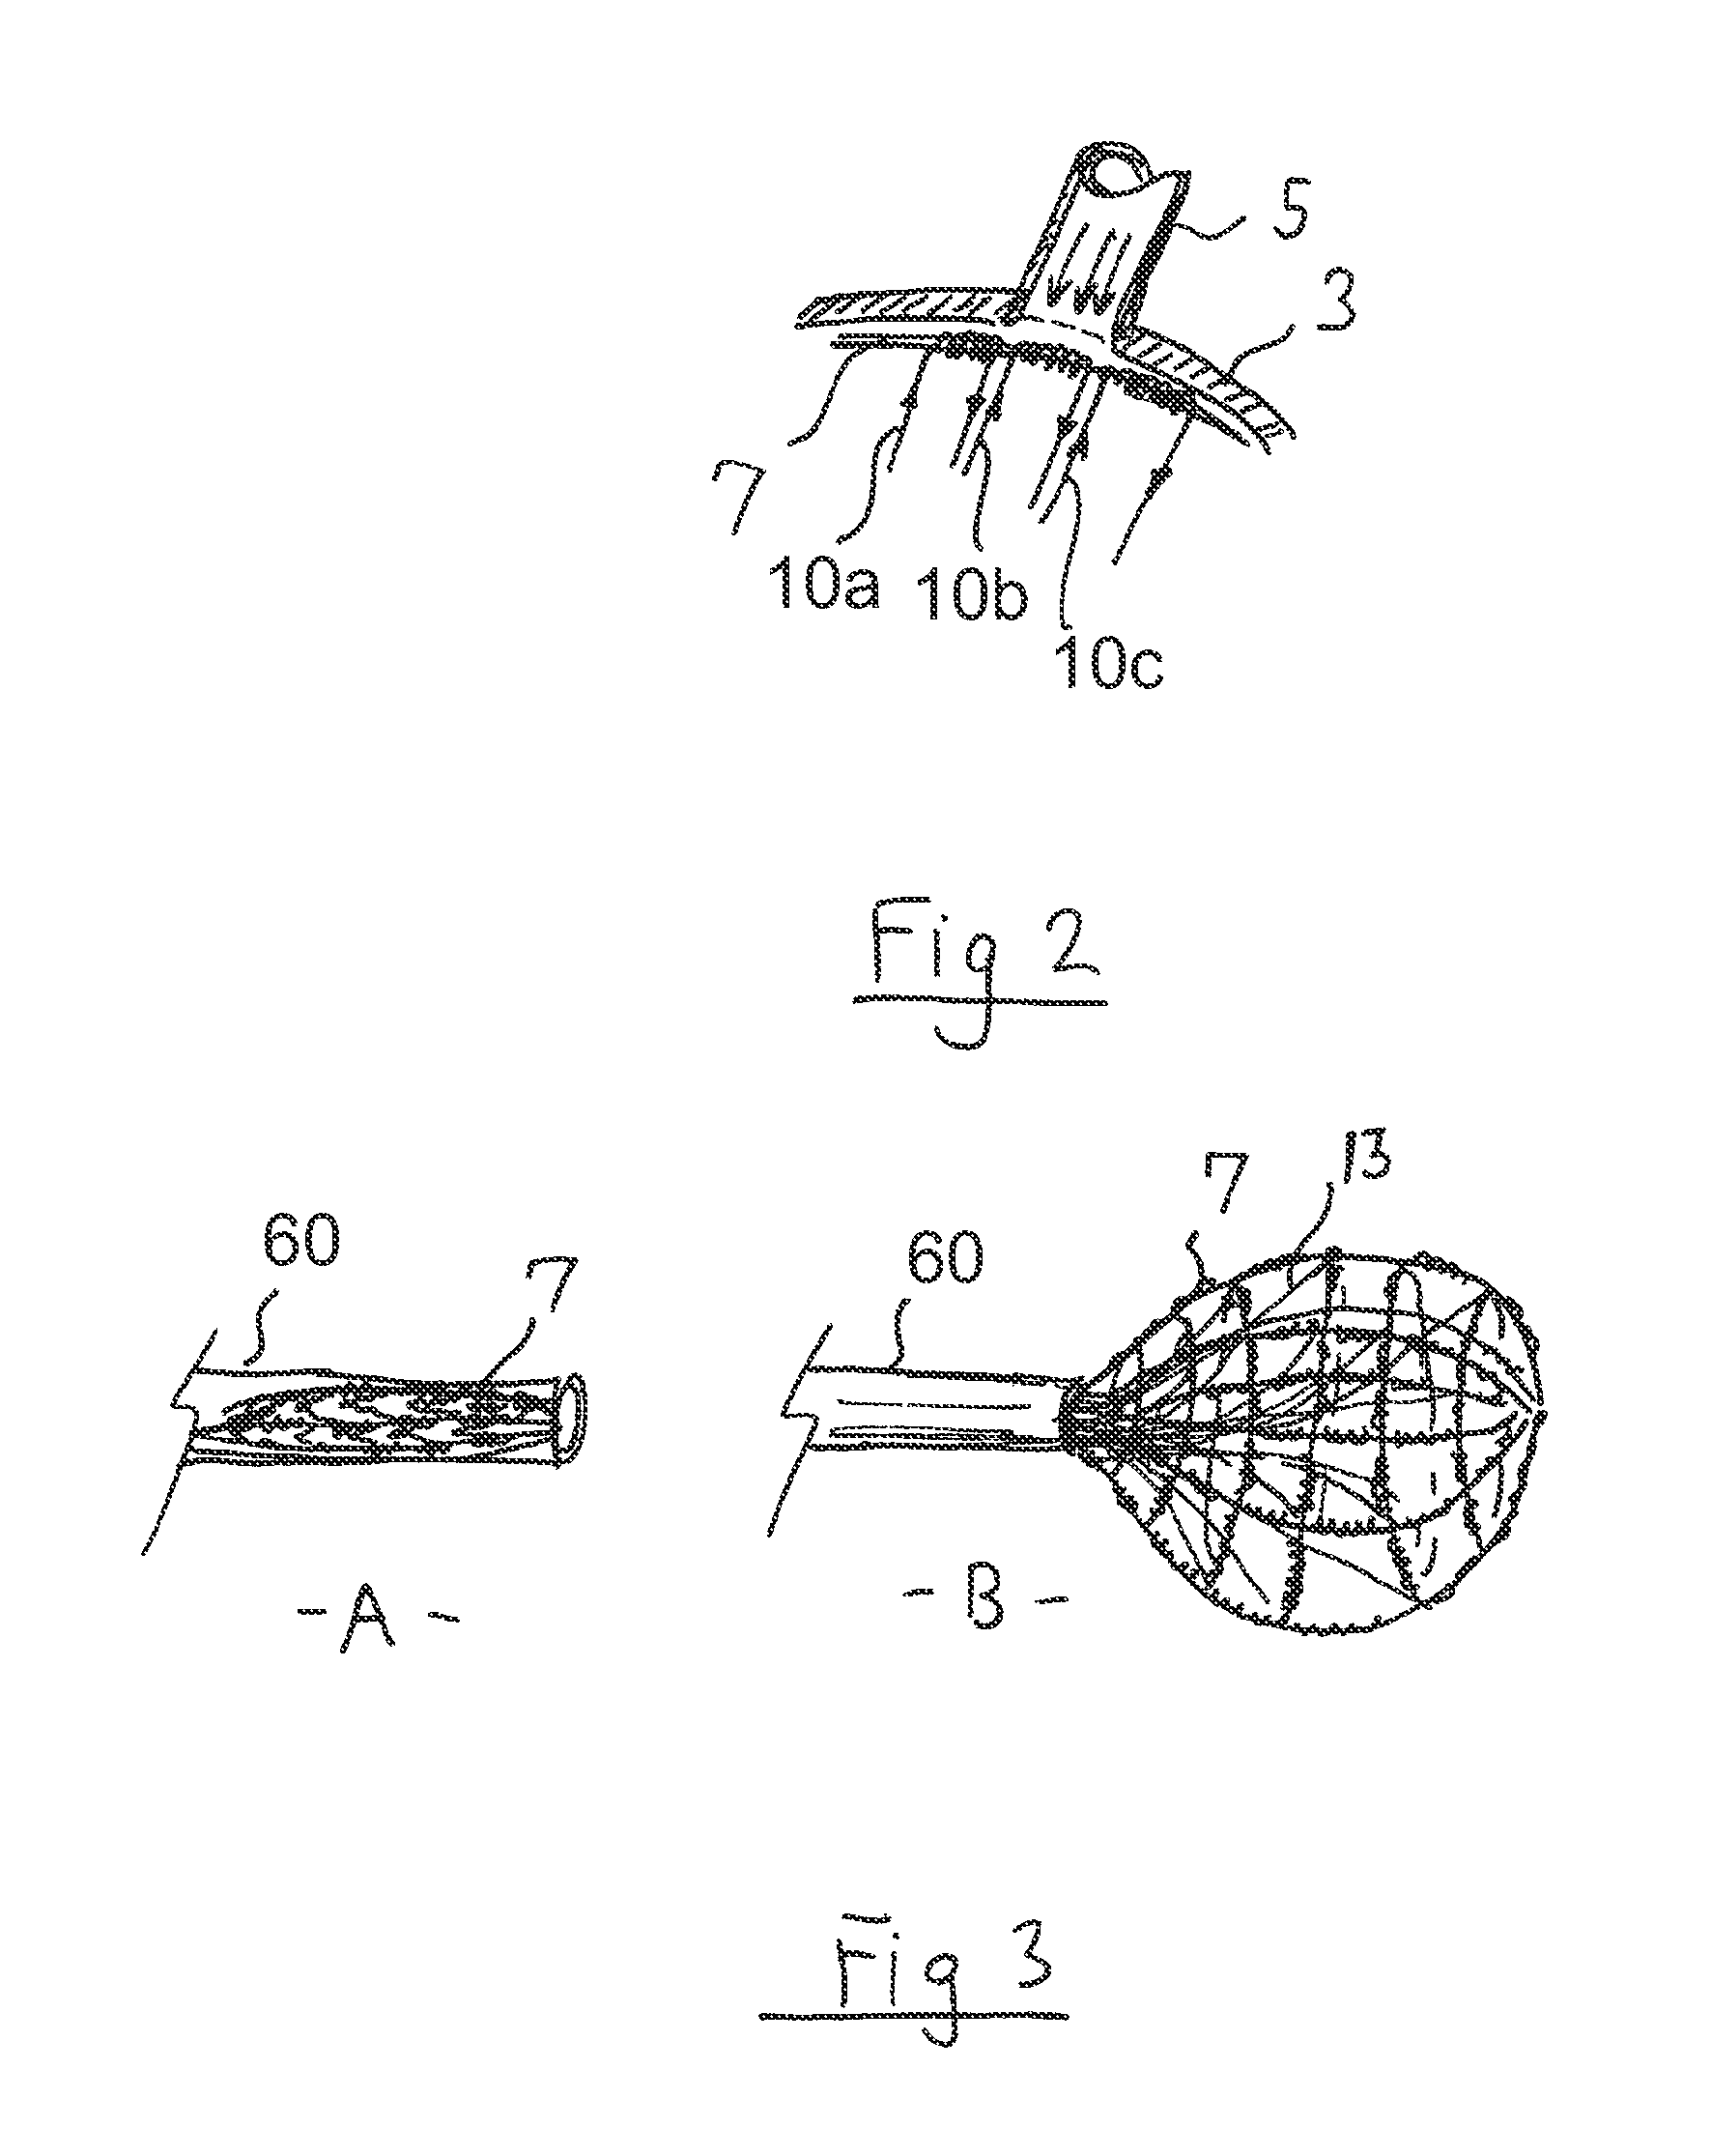 Apparatus and method for intra-cardiac mapping and ablation